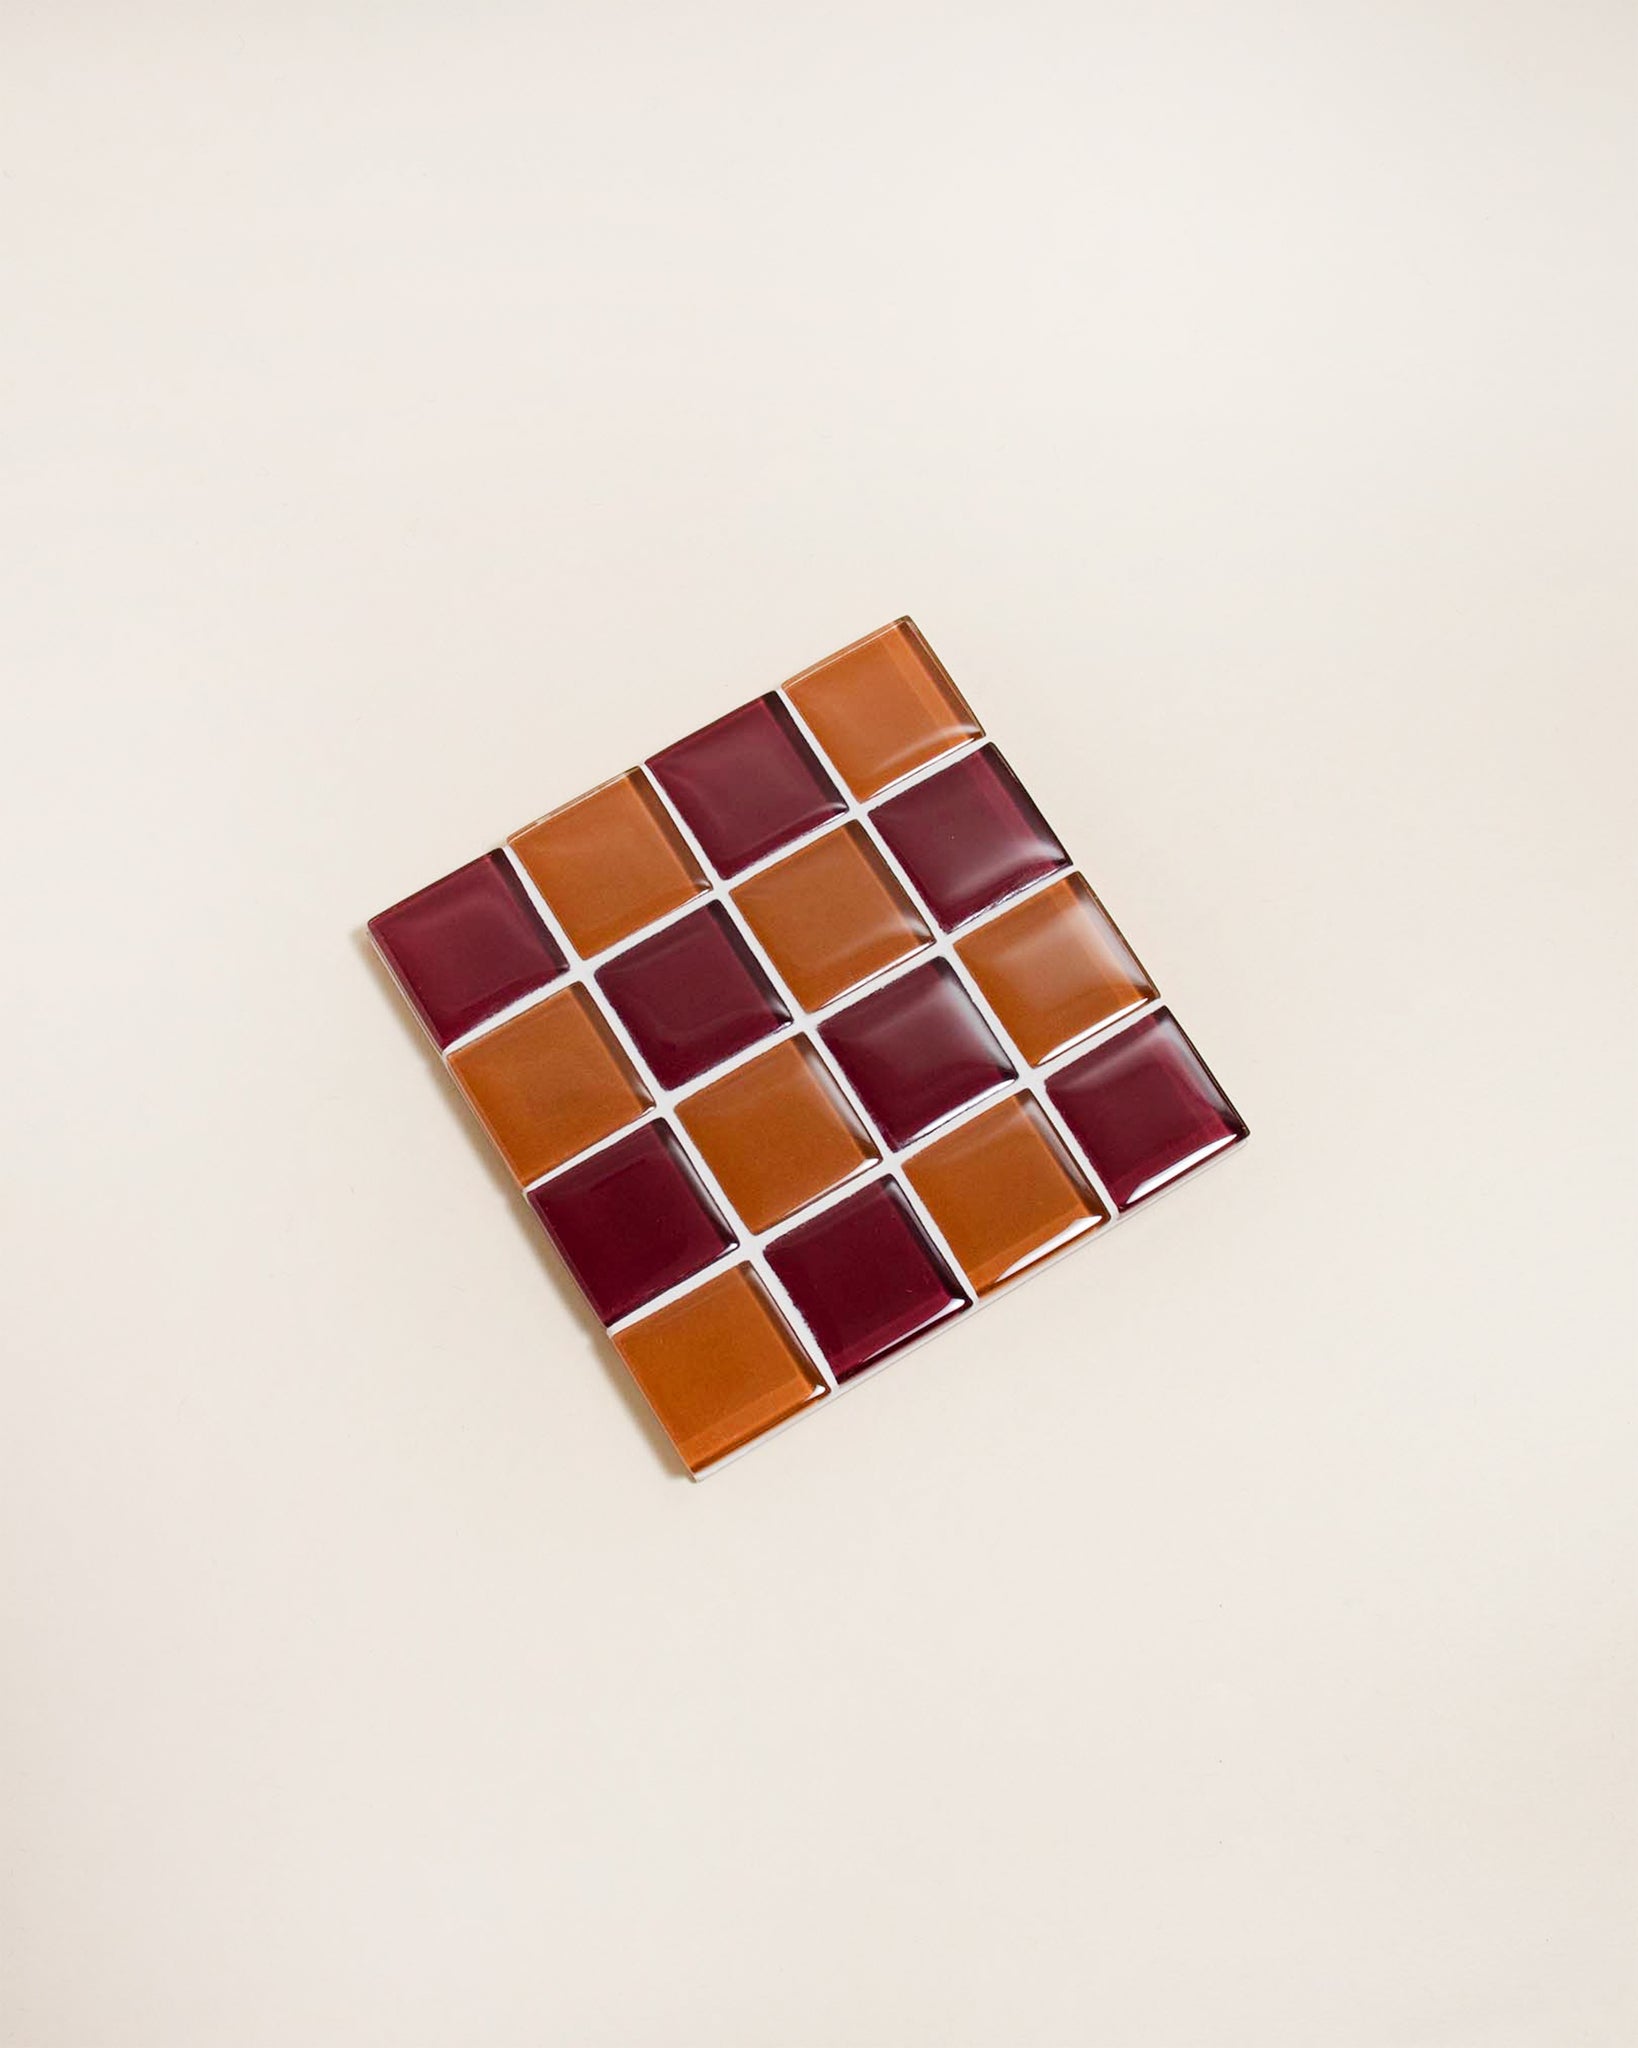 GLASS TILE COASTER - The Old Day